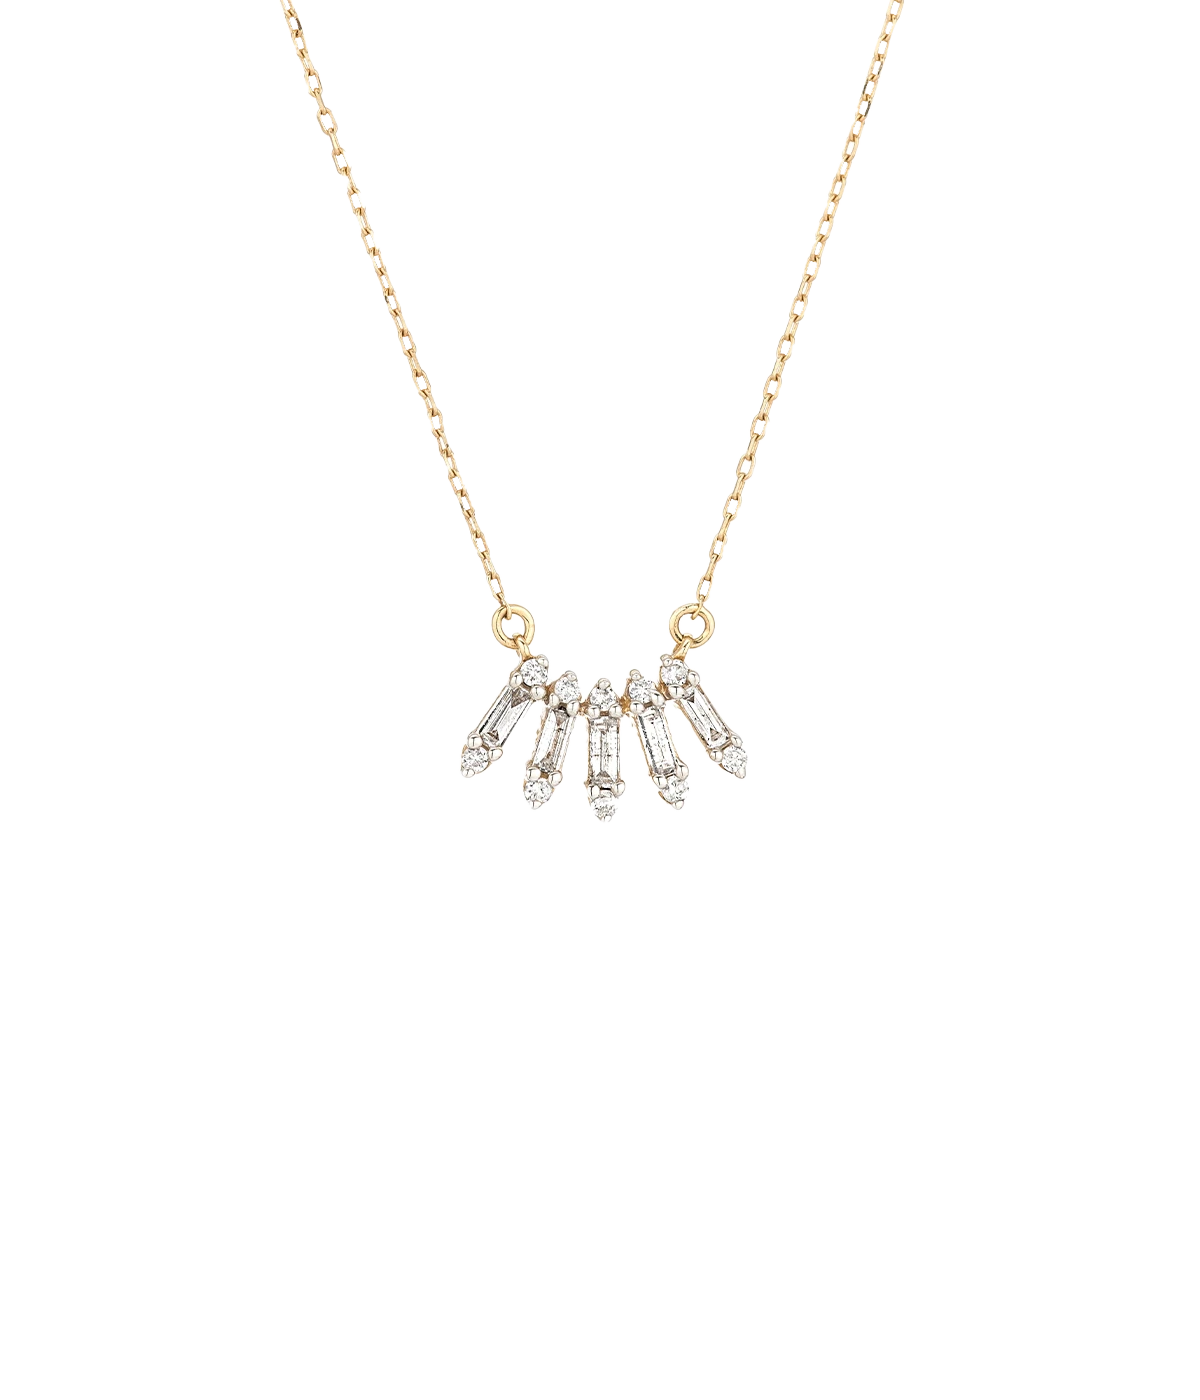 Stack Baugette Chain Necklace in 14K Yellow Gold